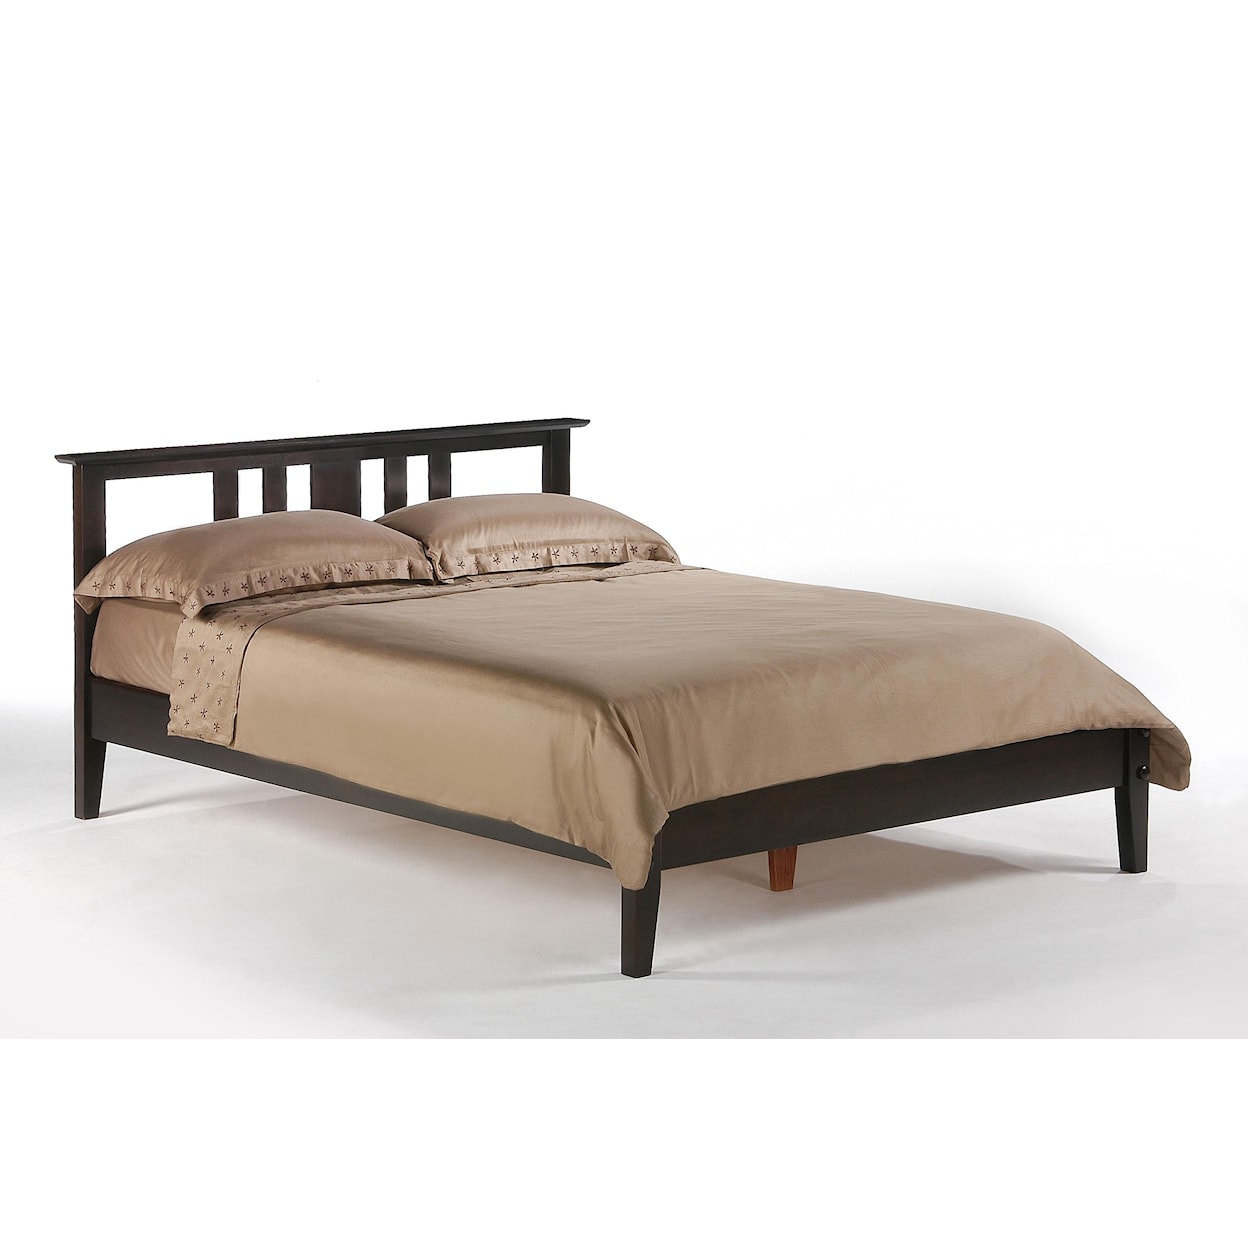 Pacific Manufacturing Thyme King Bed